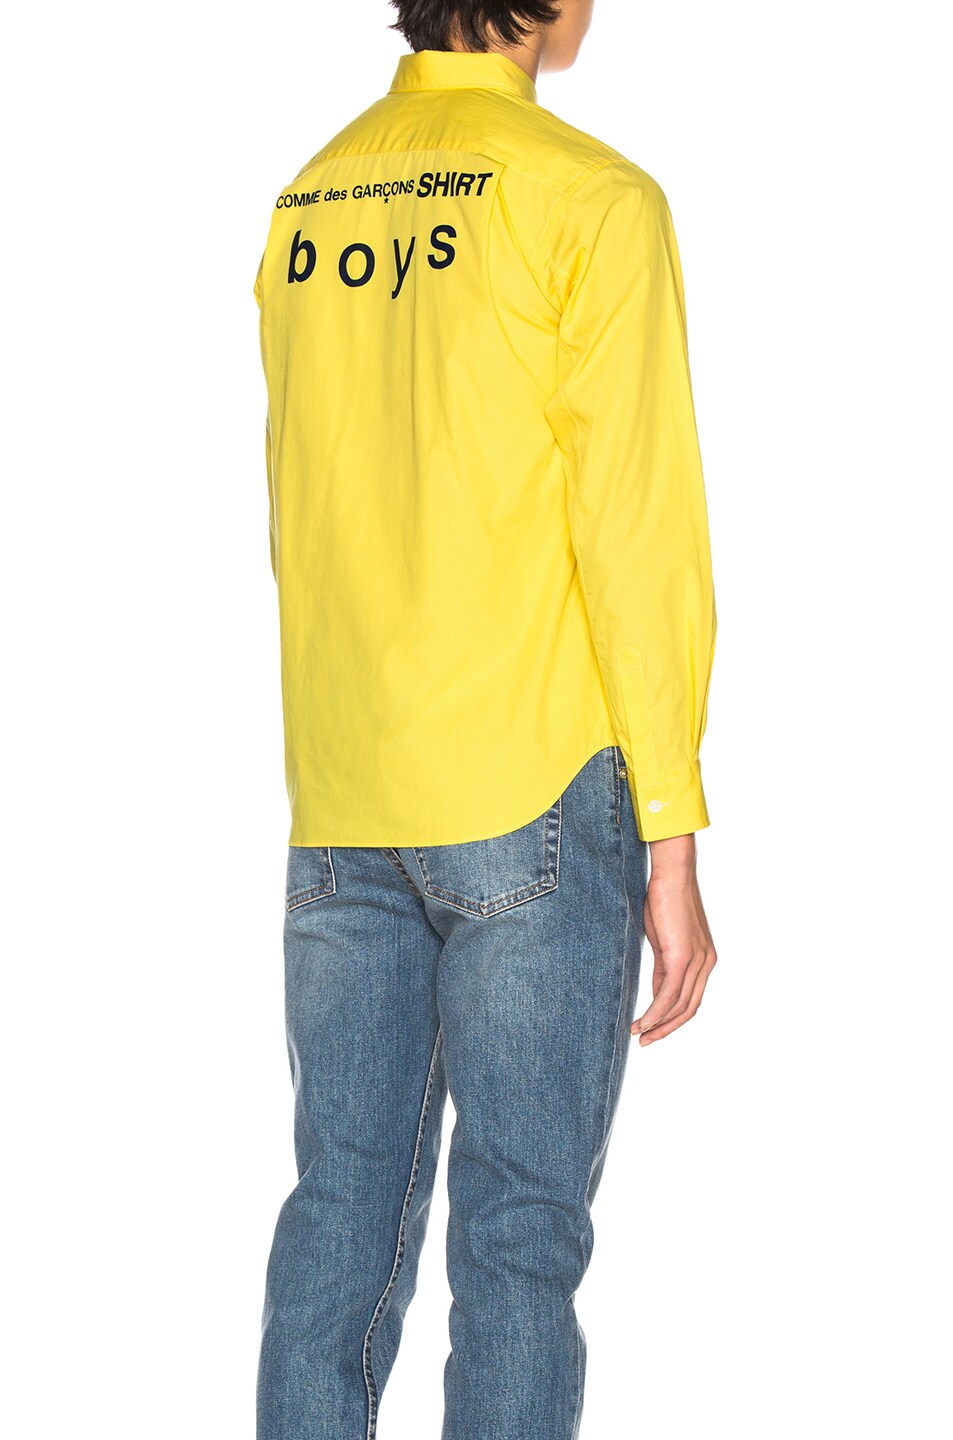 Image 1 of COMME des GARCONS SHIRT Boys Shirt in Yellow